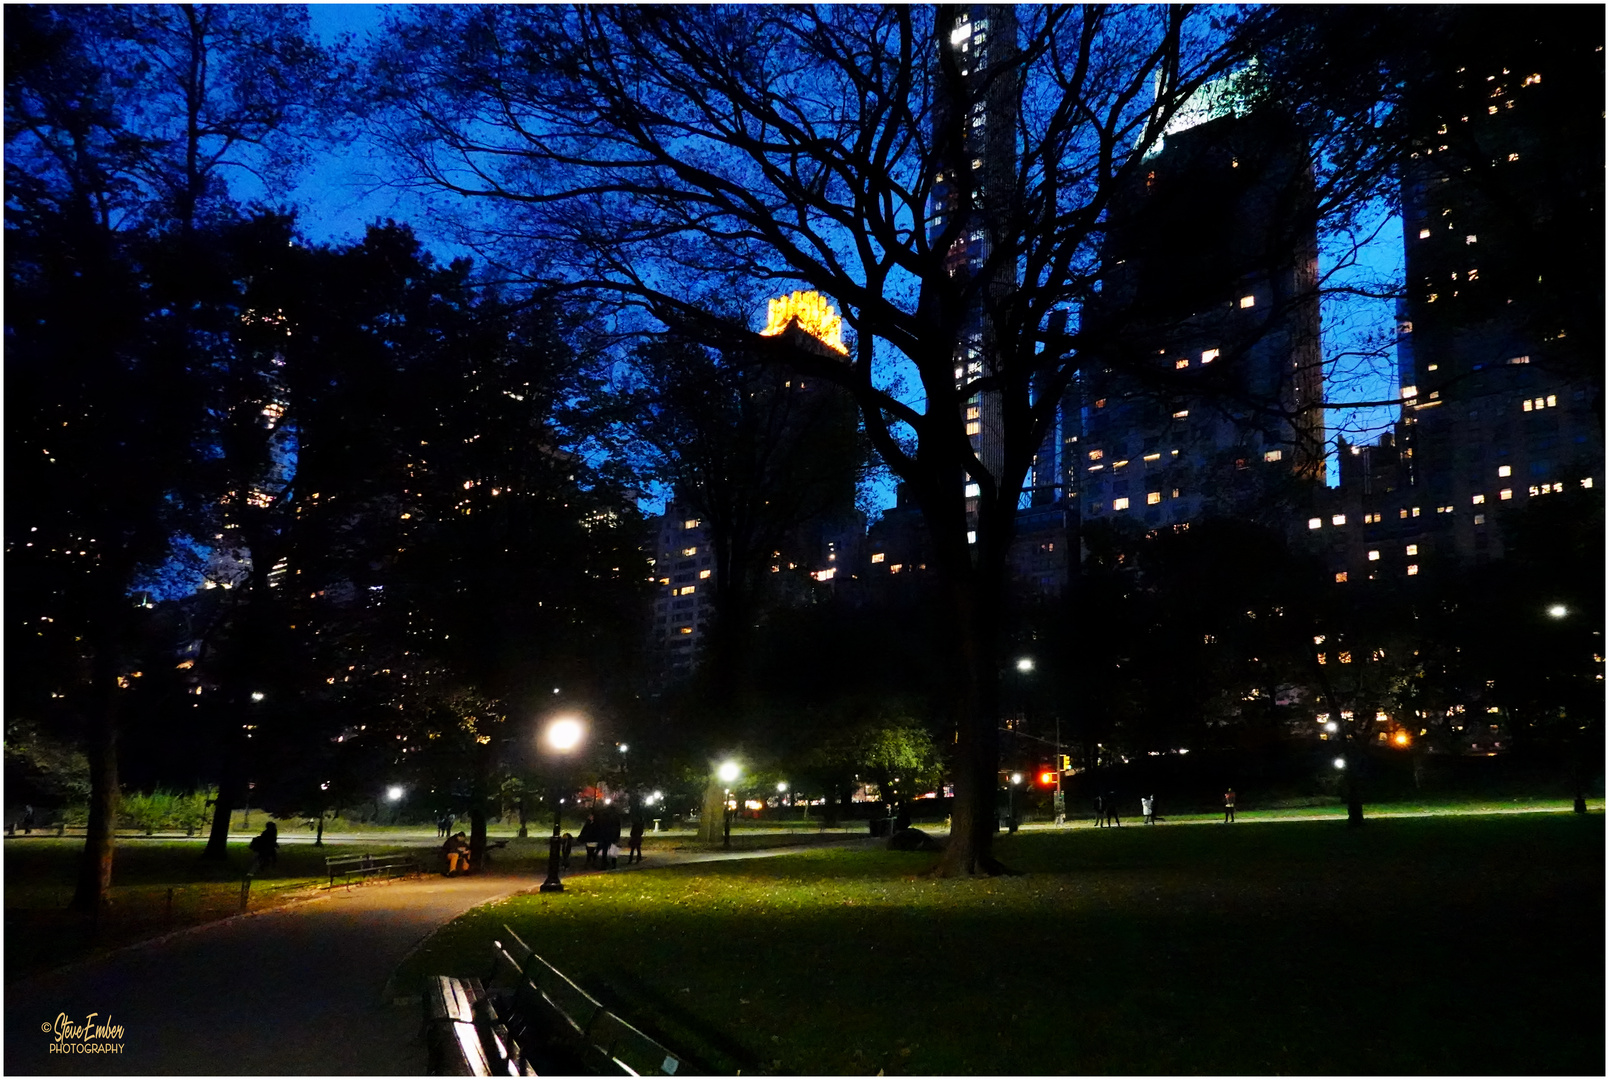 Twilight of a November Evening in Central Park